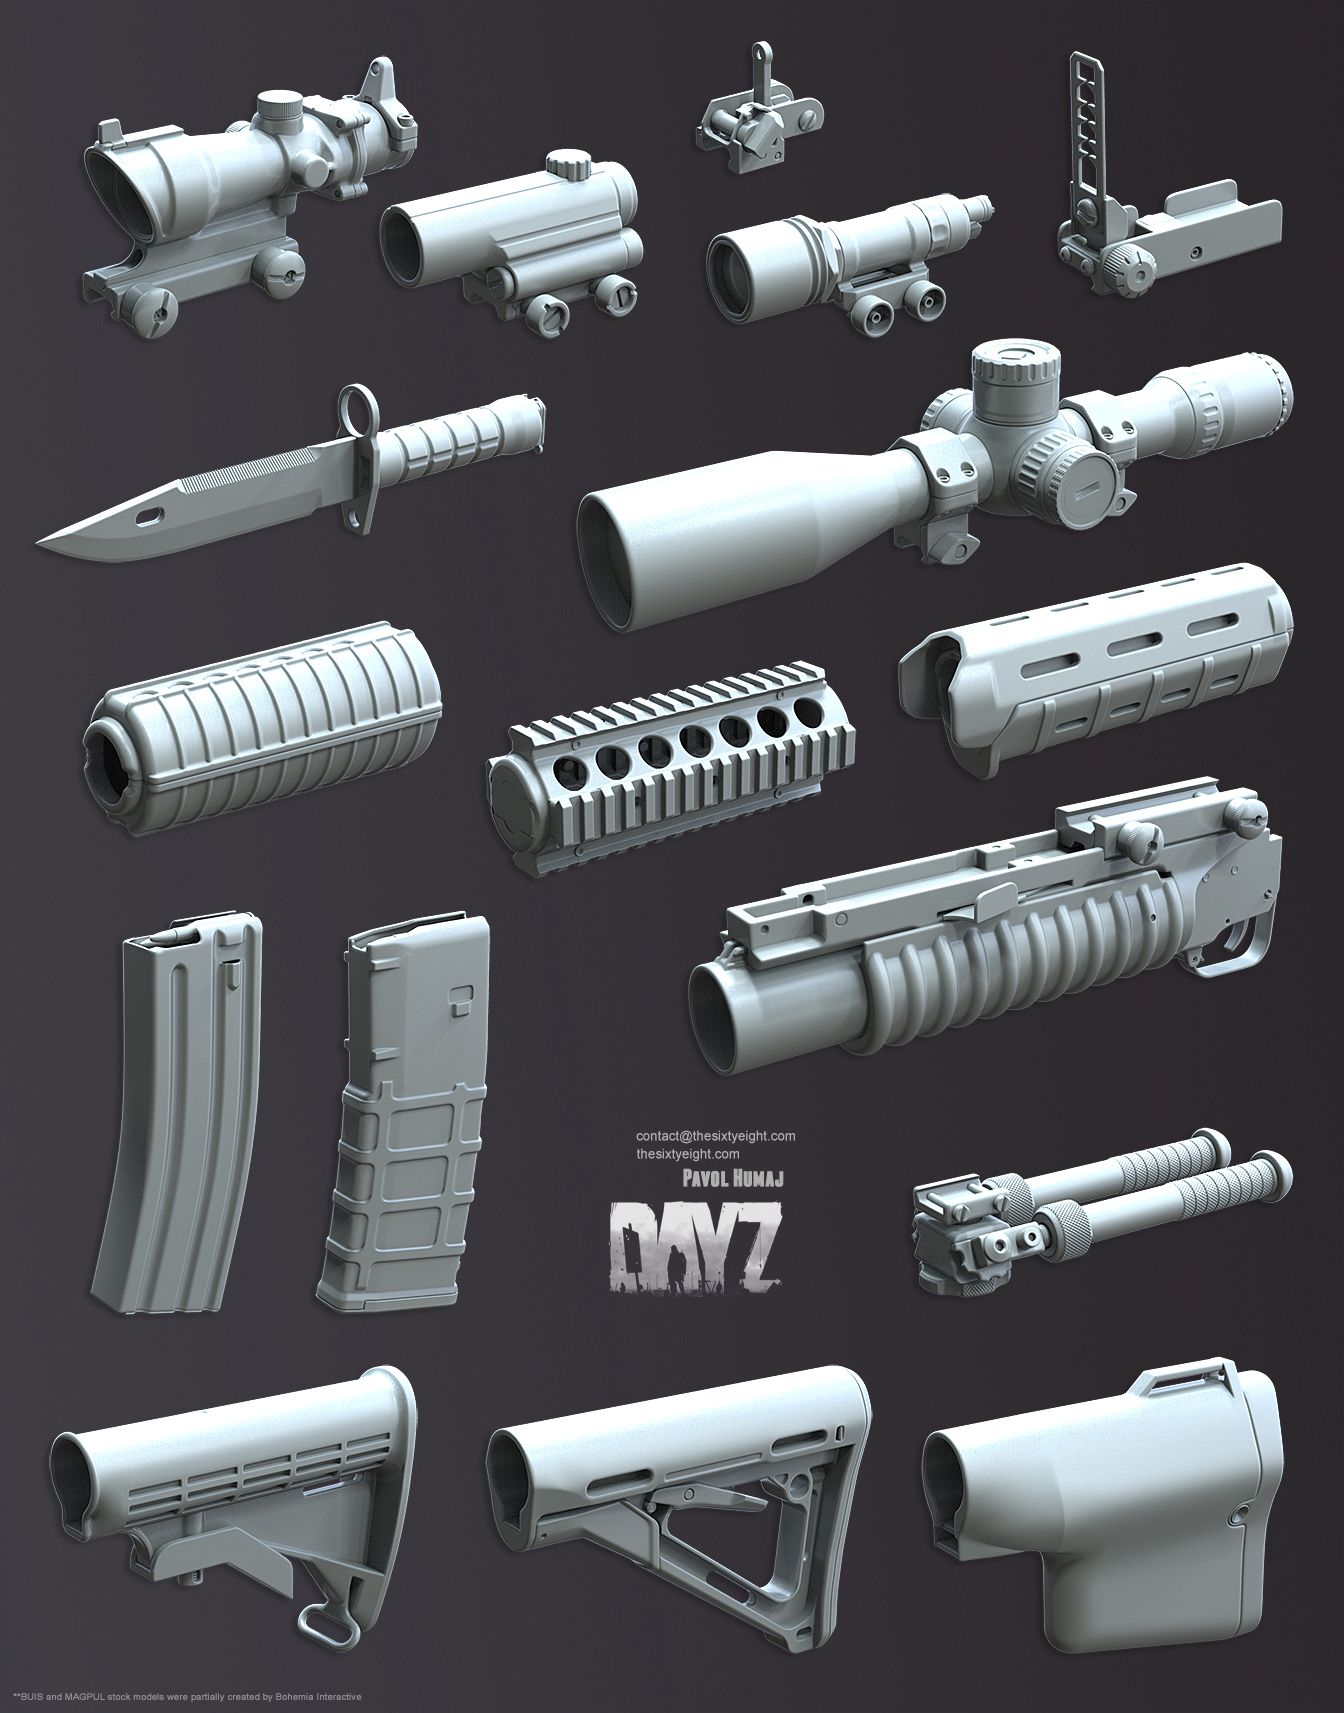 Attachments models created by Pavol Humaj for DayZ